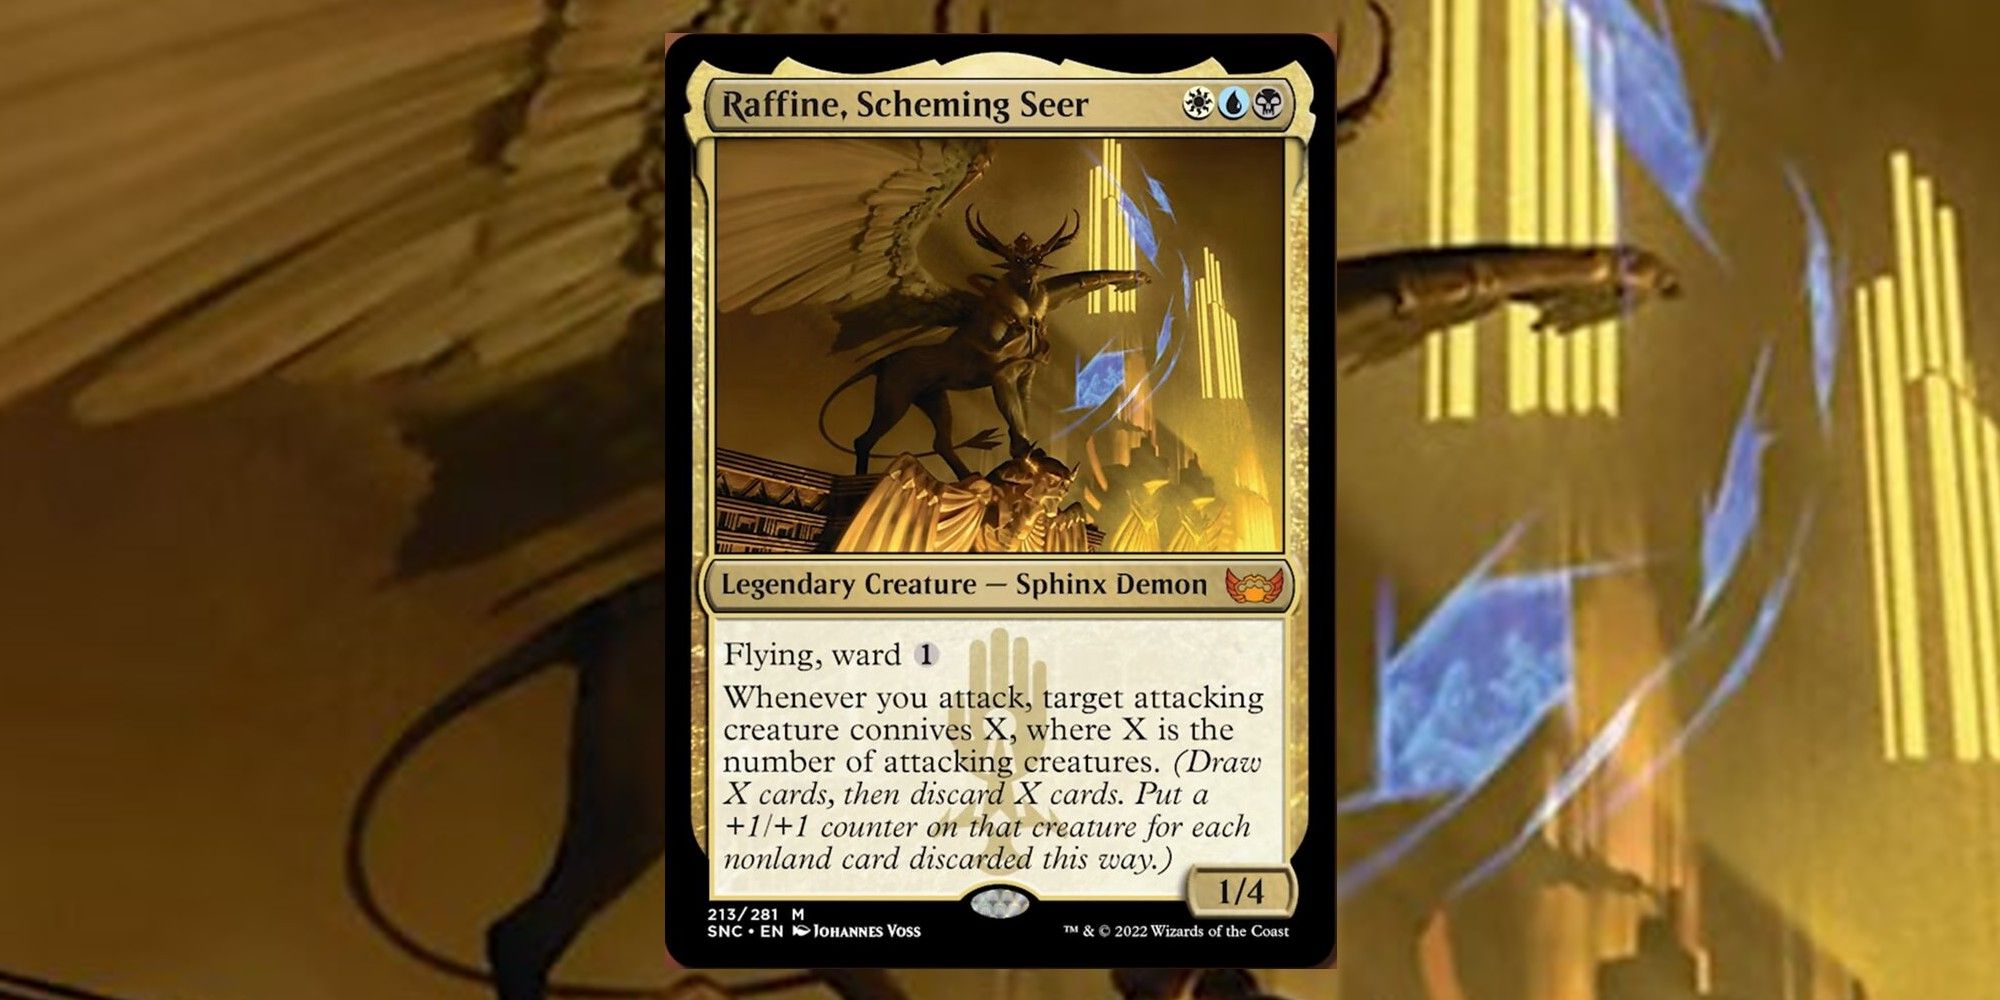 Image of the Raffine, Scheming Seer card in Magic: The Gathering, with art by Johannes Voss